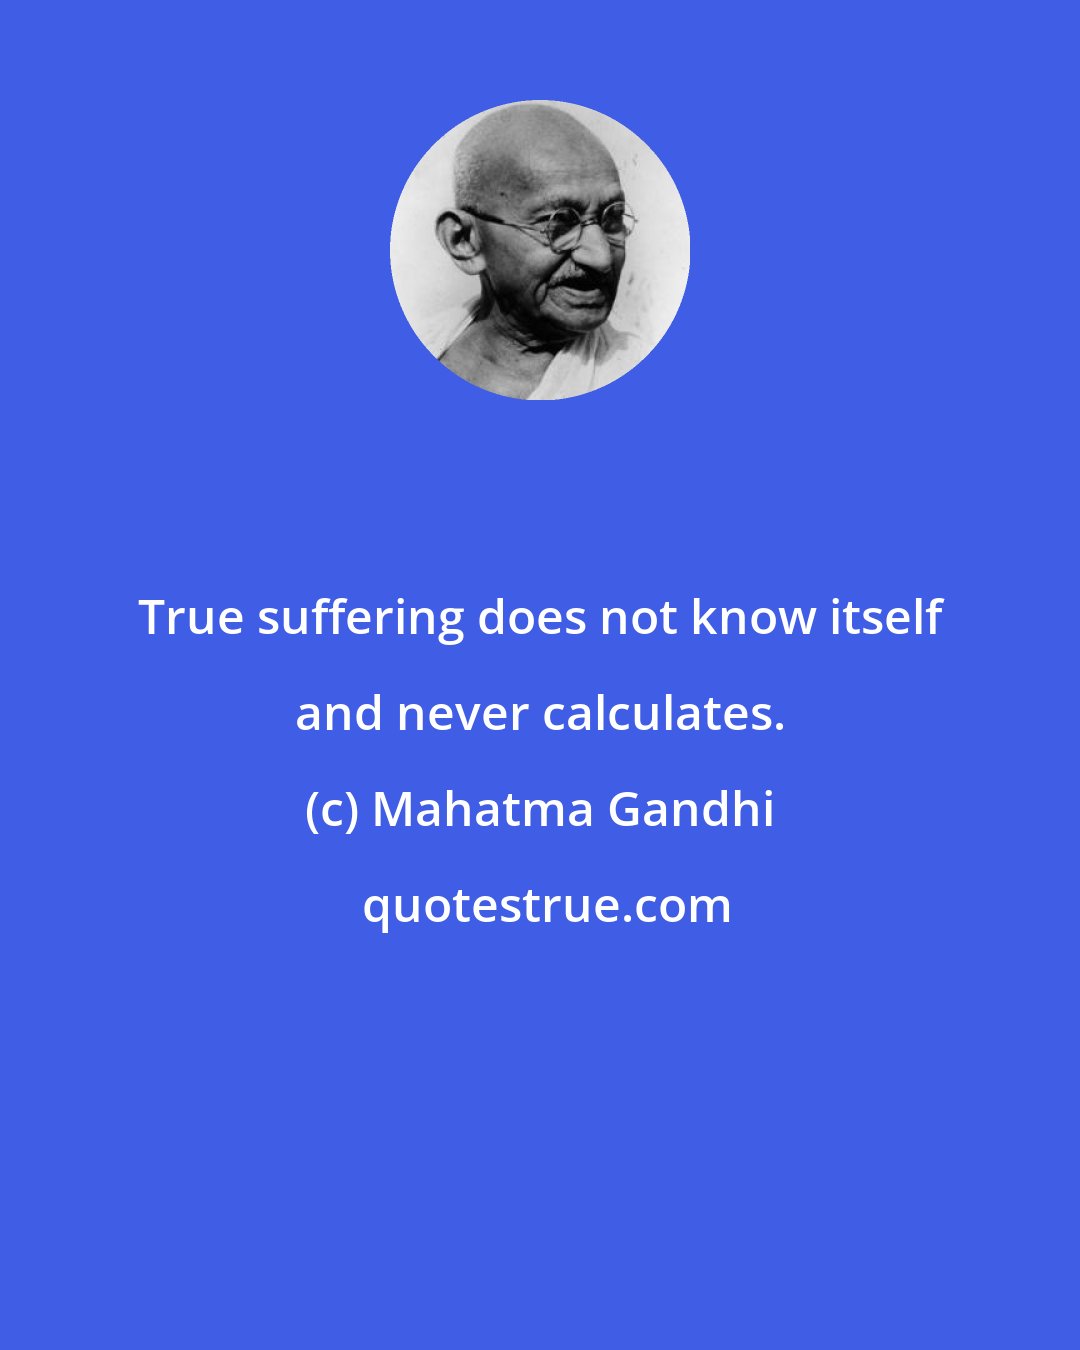 Mahatma Gandhi: True suffering does not know itself and never calculates.